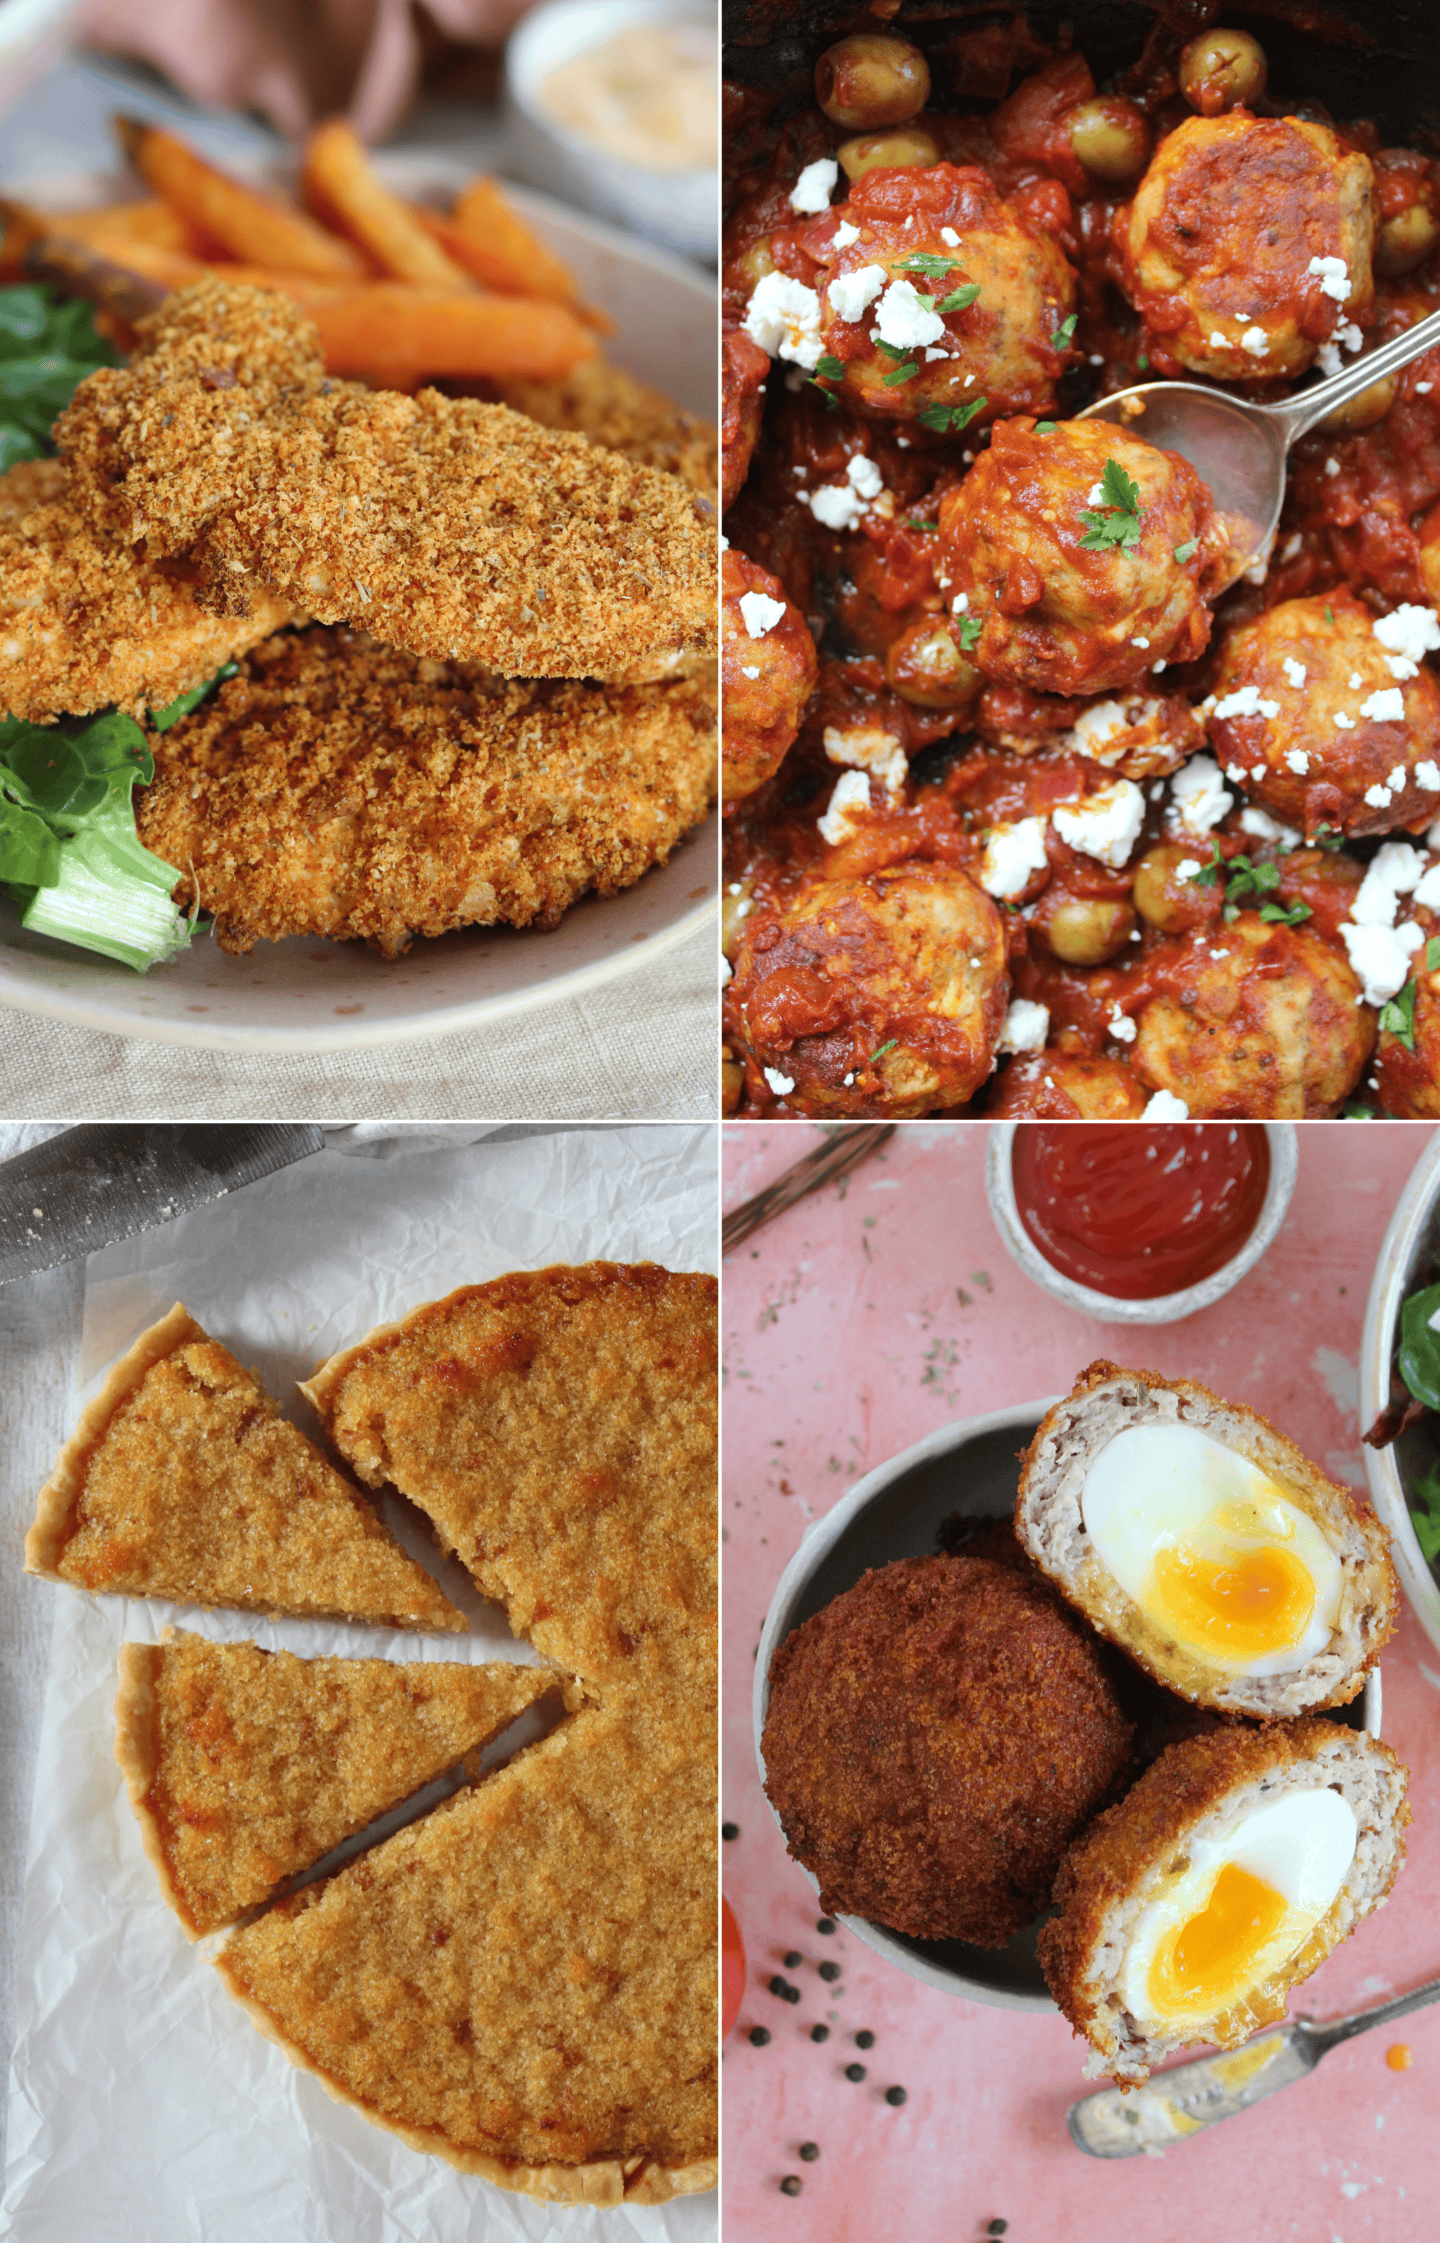 Breaded chicken, meatballs, treacle tart and scotch eggs.